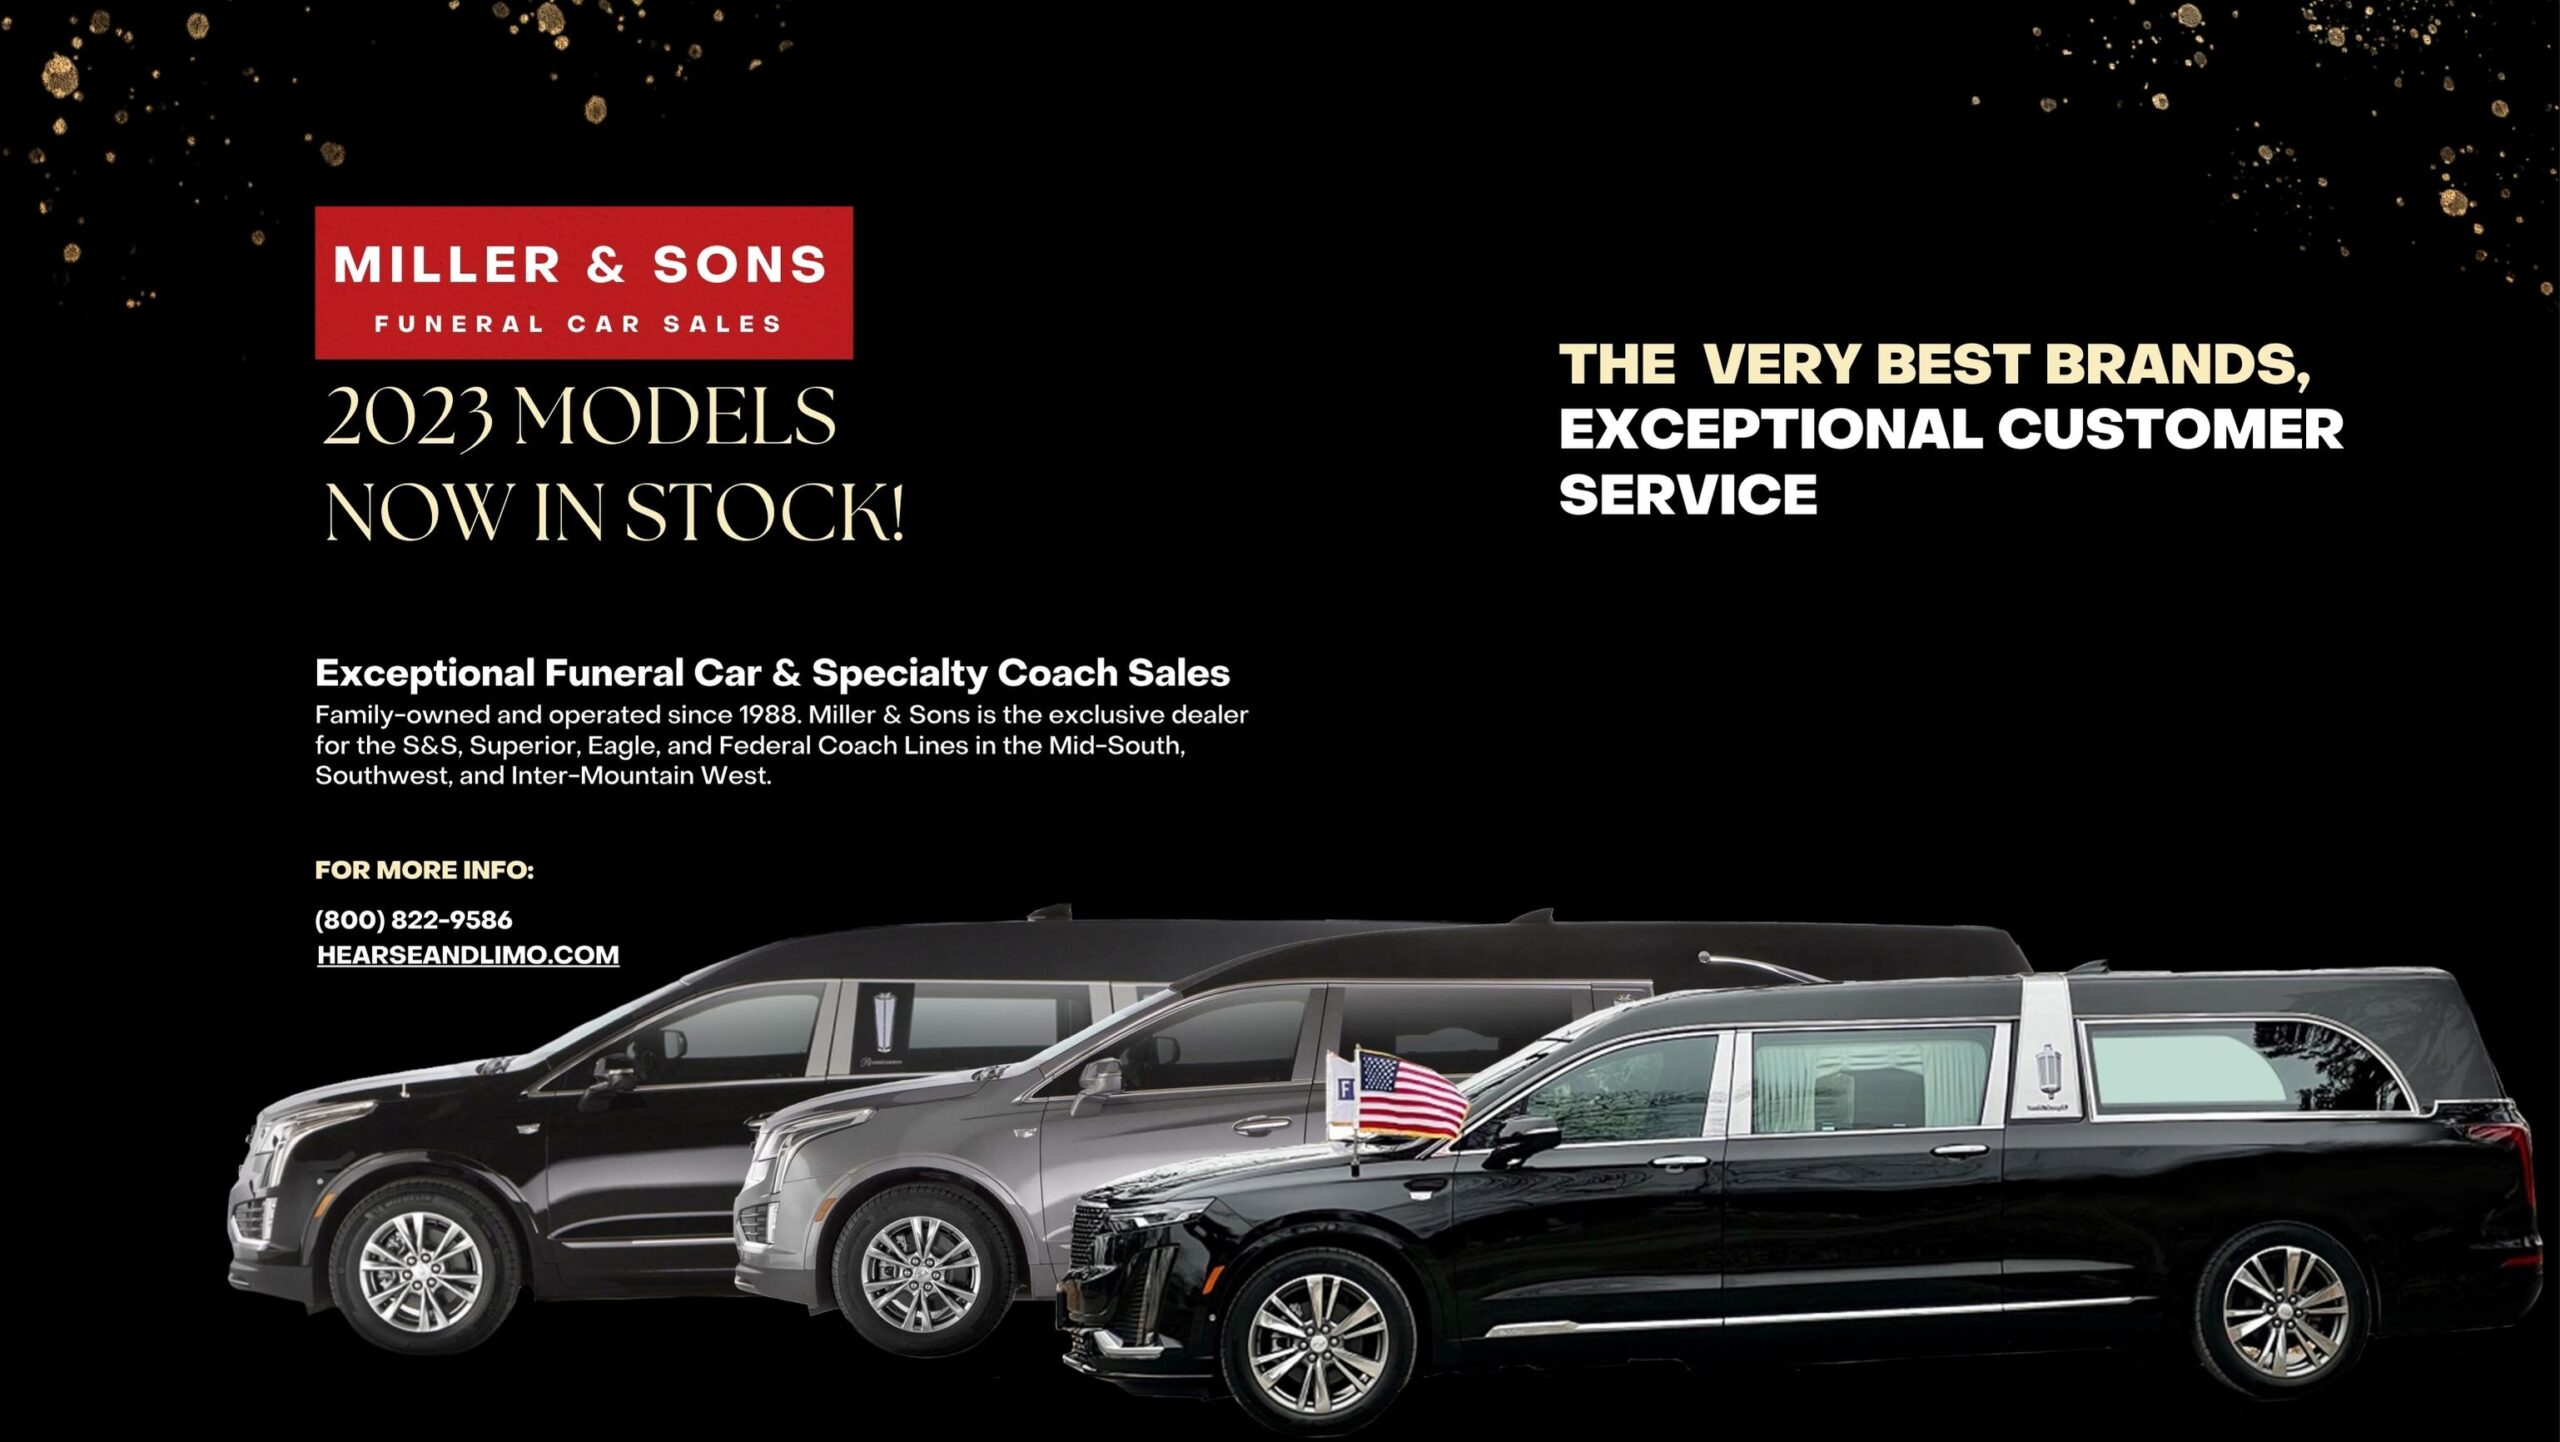 Funeral Car Parts and Accessories